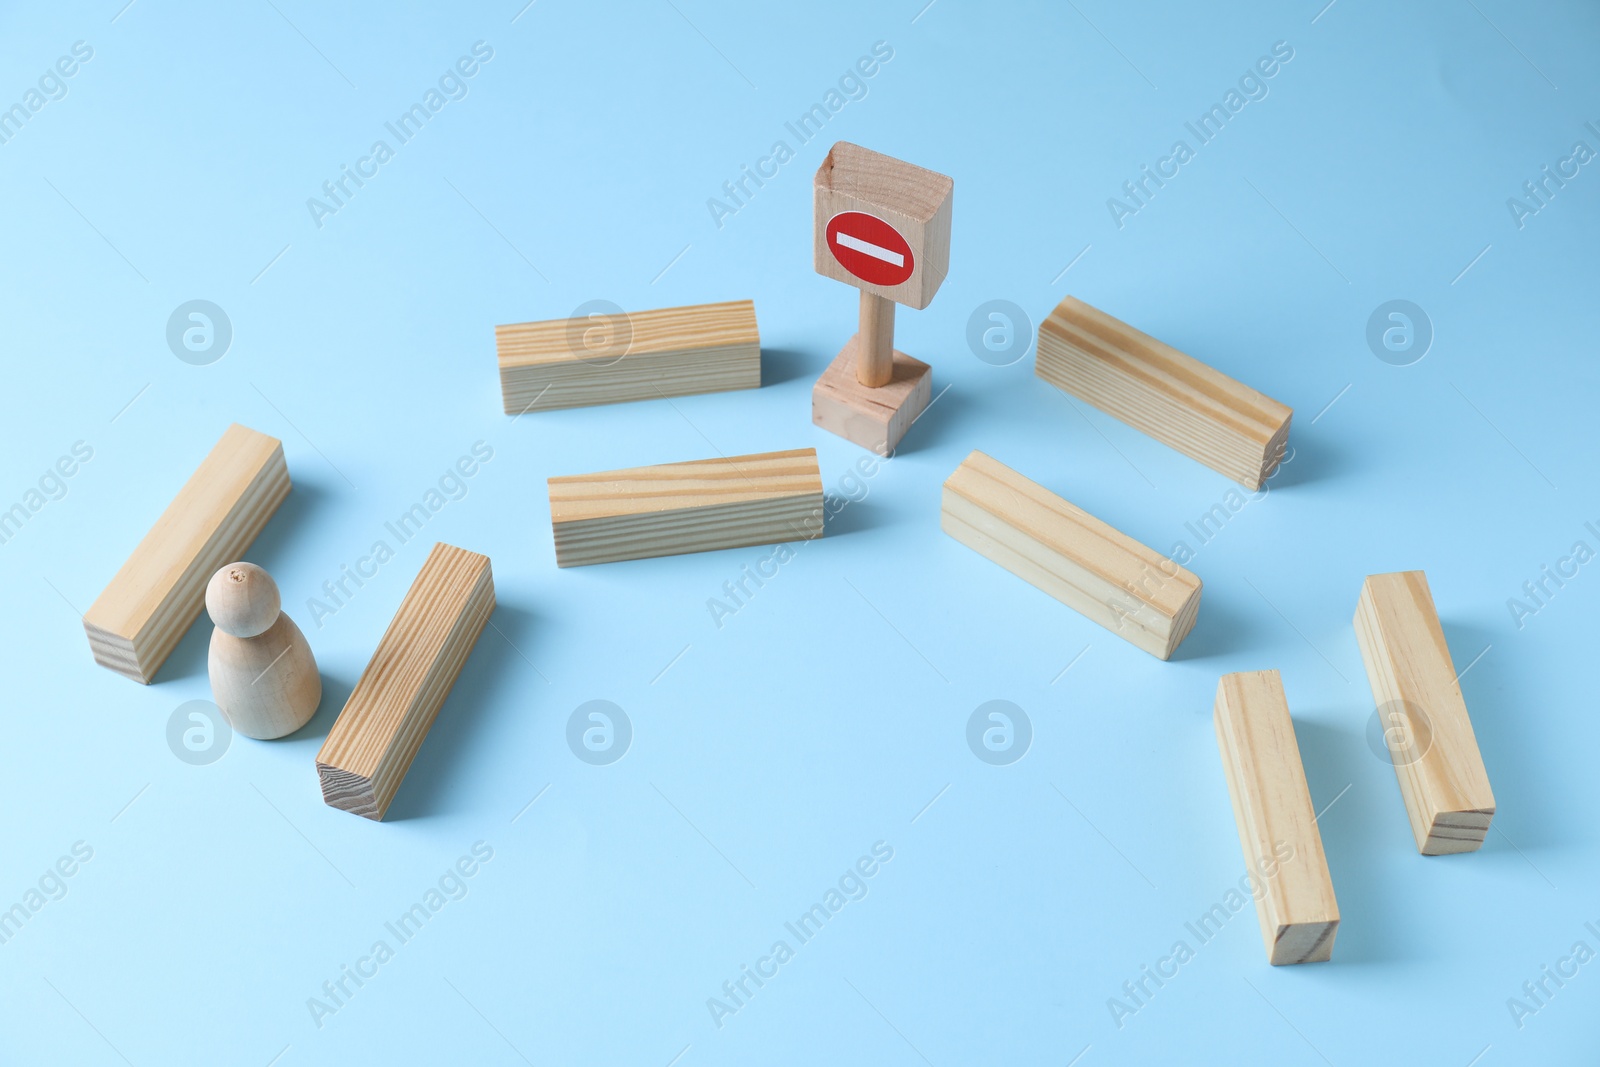 Photo of Overcoming barries for development and success. Wooden human figure movement blocked by road Stop sign on light blue background